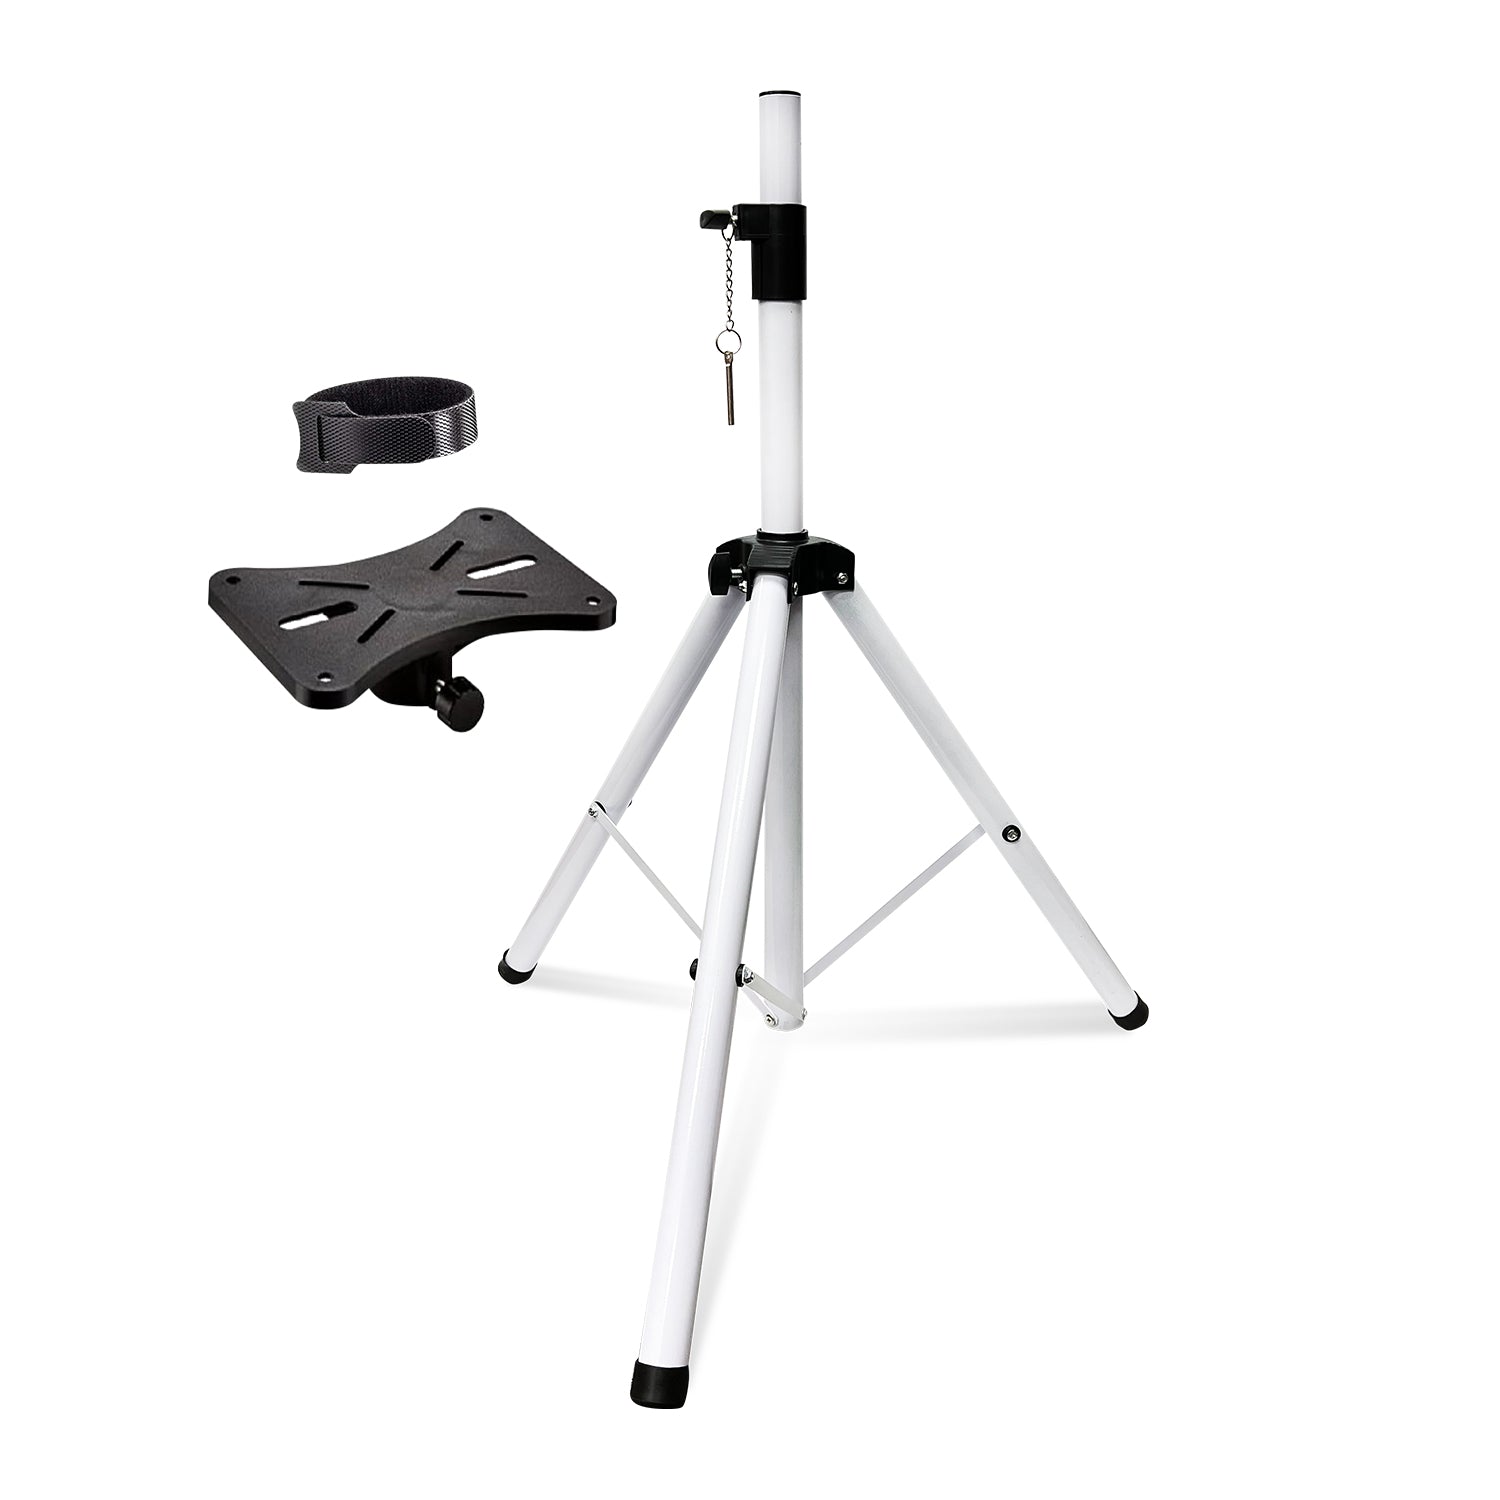 5 Core Universal Speaker Stand White w Mount Bracket • Height Adjustable Tripod Stands 100 lbs Capacity